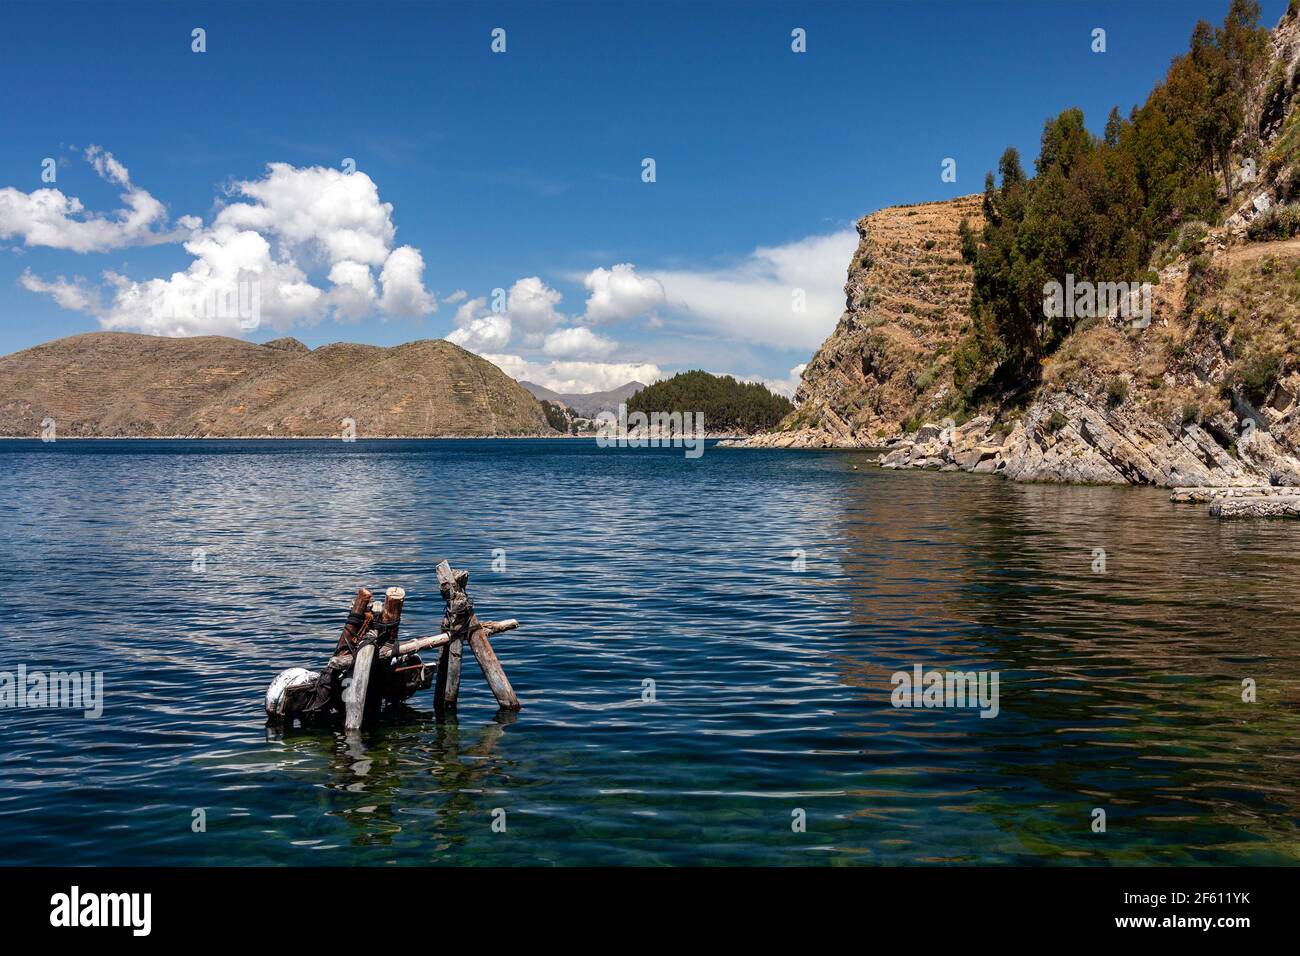 Sun Island (Isla del Sol) and Lake Titicaca in Bolivia, South America. There are no motor vehicles or paved roads on the island. The main economic act Stock Photo